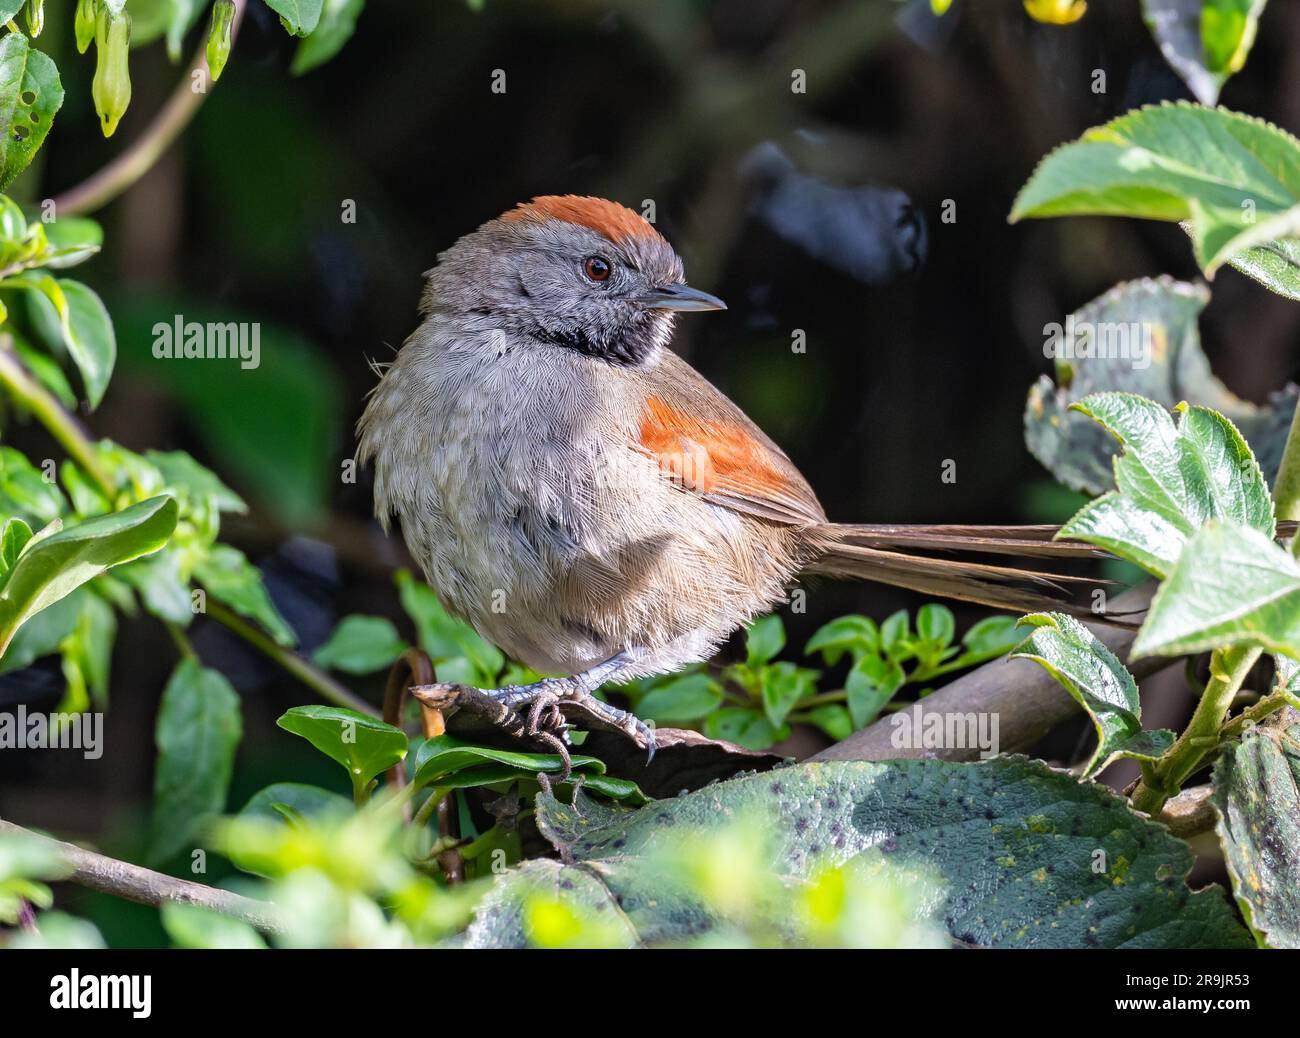 A Silvery-throated Spinetail (Synallaxis subpudica) perched on a branch. Colombia, South America. Stock Photo